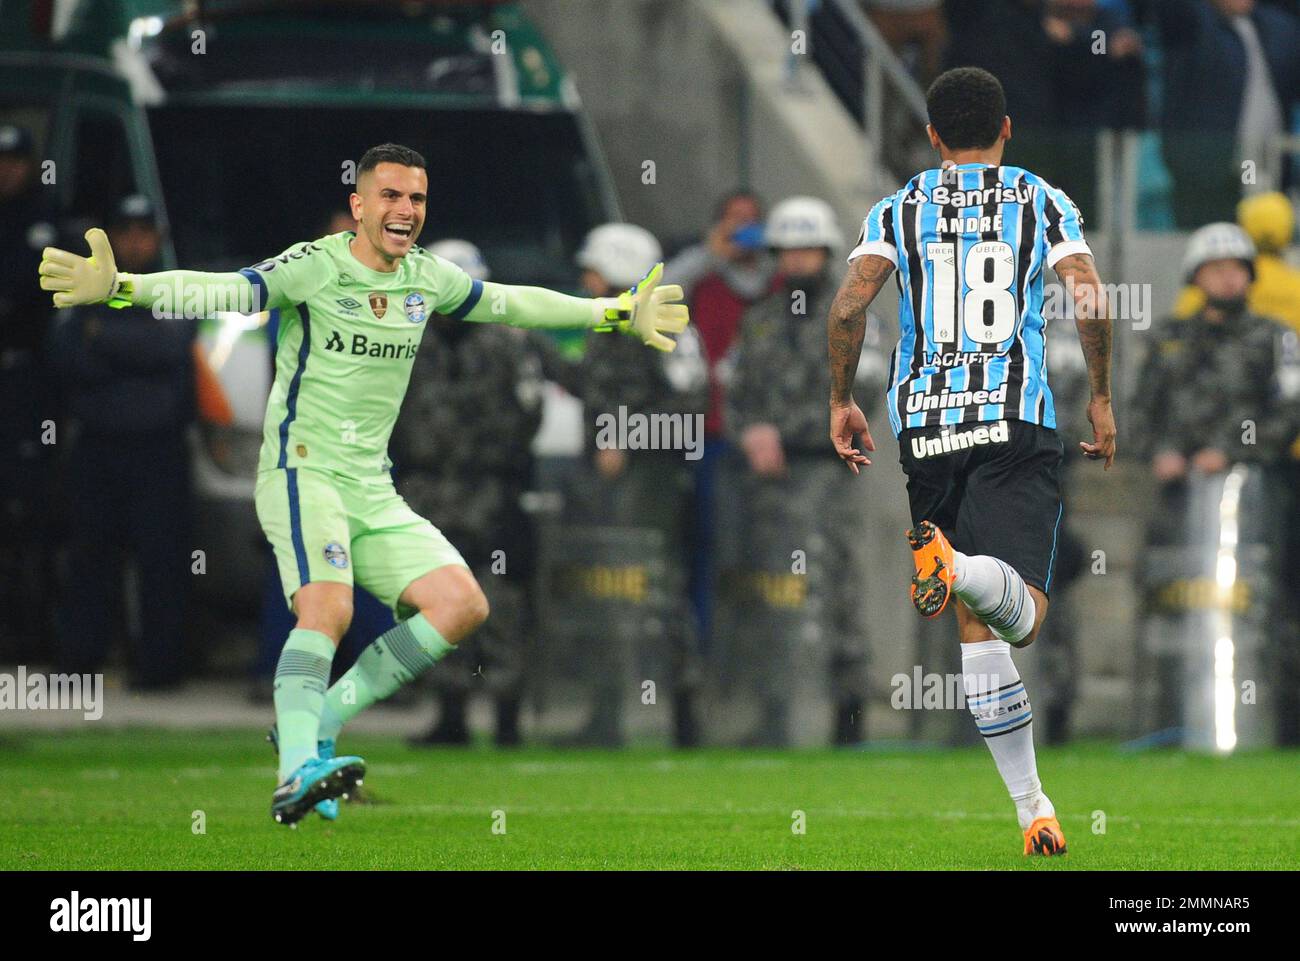 Andre of Brazil's Gremio, right, celebrates with goalkeeper Marcelo Grohe, after scoring from the penalty spot the victory goal against Argentina's Estudiantes in a Copa Libertadores soccer game, in Porto Alegre, Brazil, Tuesday, Aug. 28, 2018. Gremio won 5-3 in the penalty shootout and qualified for the quarterfinals. (AP Photo/Wesley Santos) Stock Photo